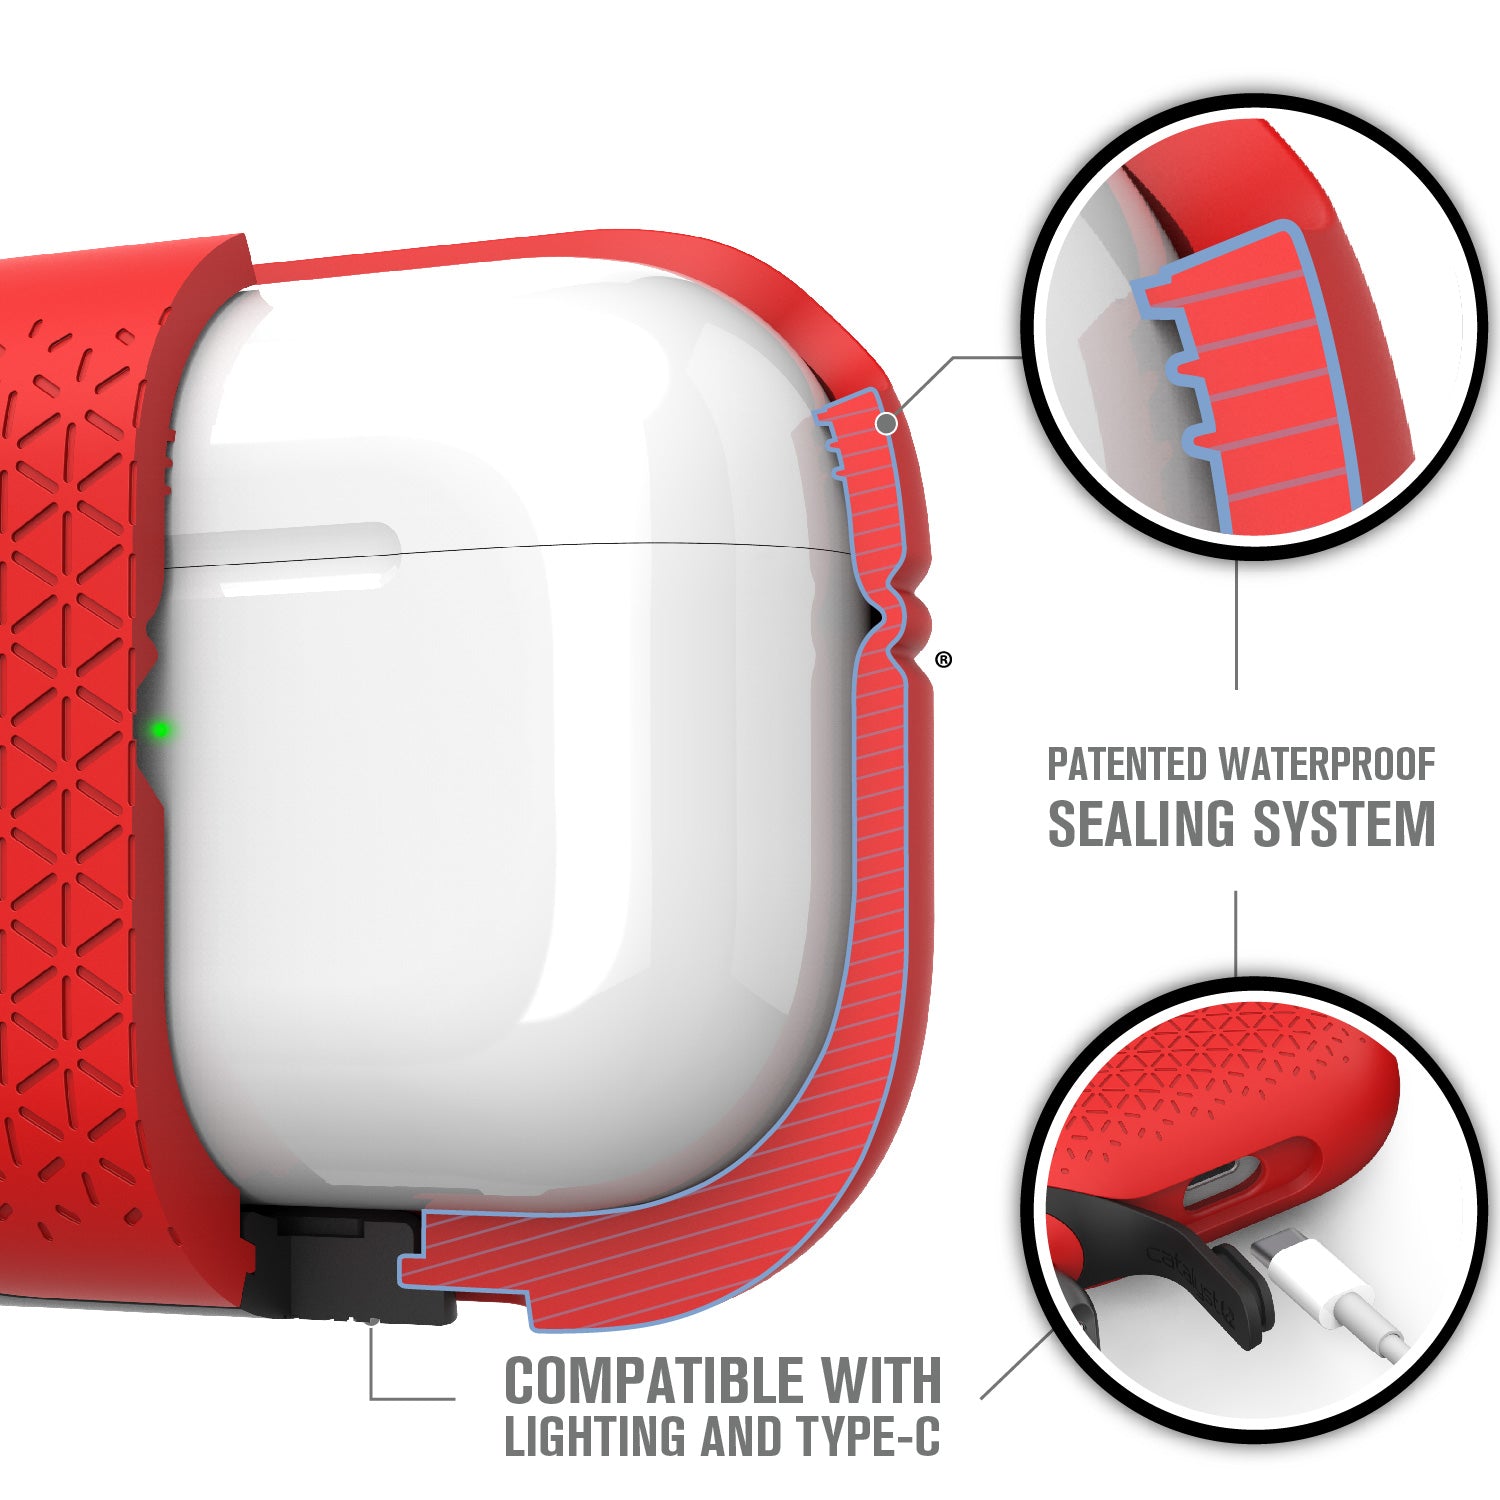 catalyst airpods pro gen 2 1 waterproof case carabiner premium edition flame red showing the patented waterproof sealing system texts reads patented waterproof sealing system compatible with lightning and type c